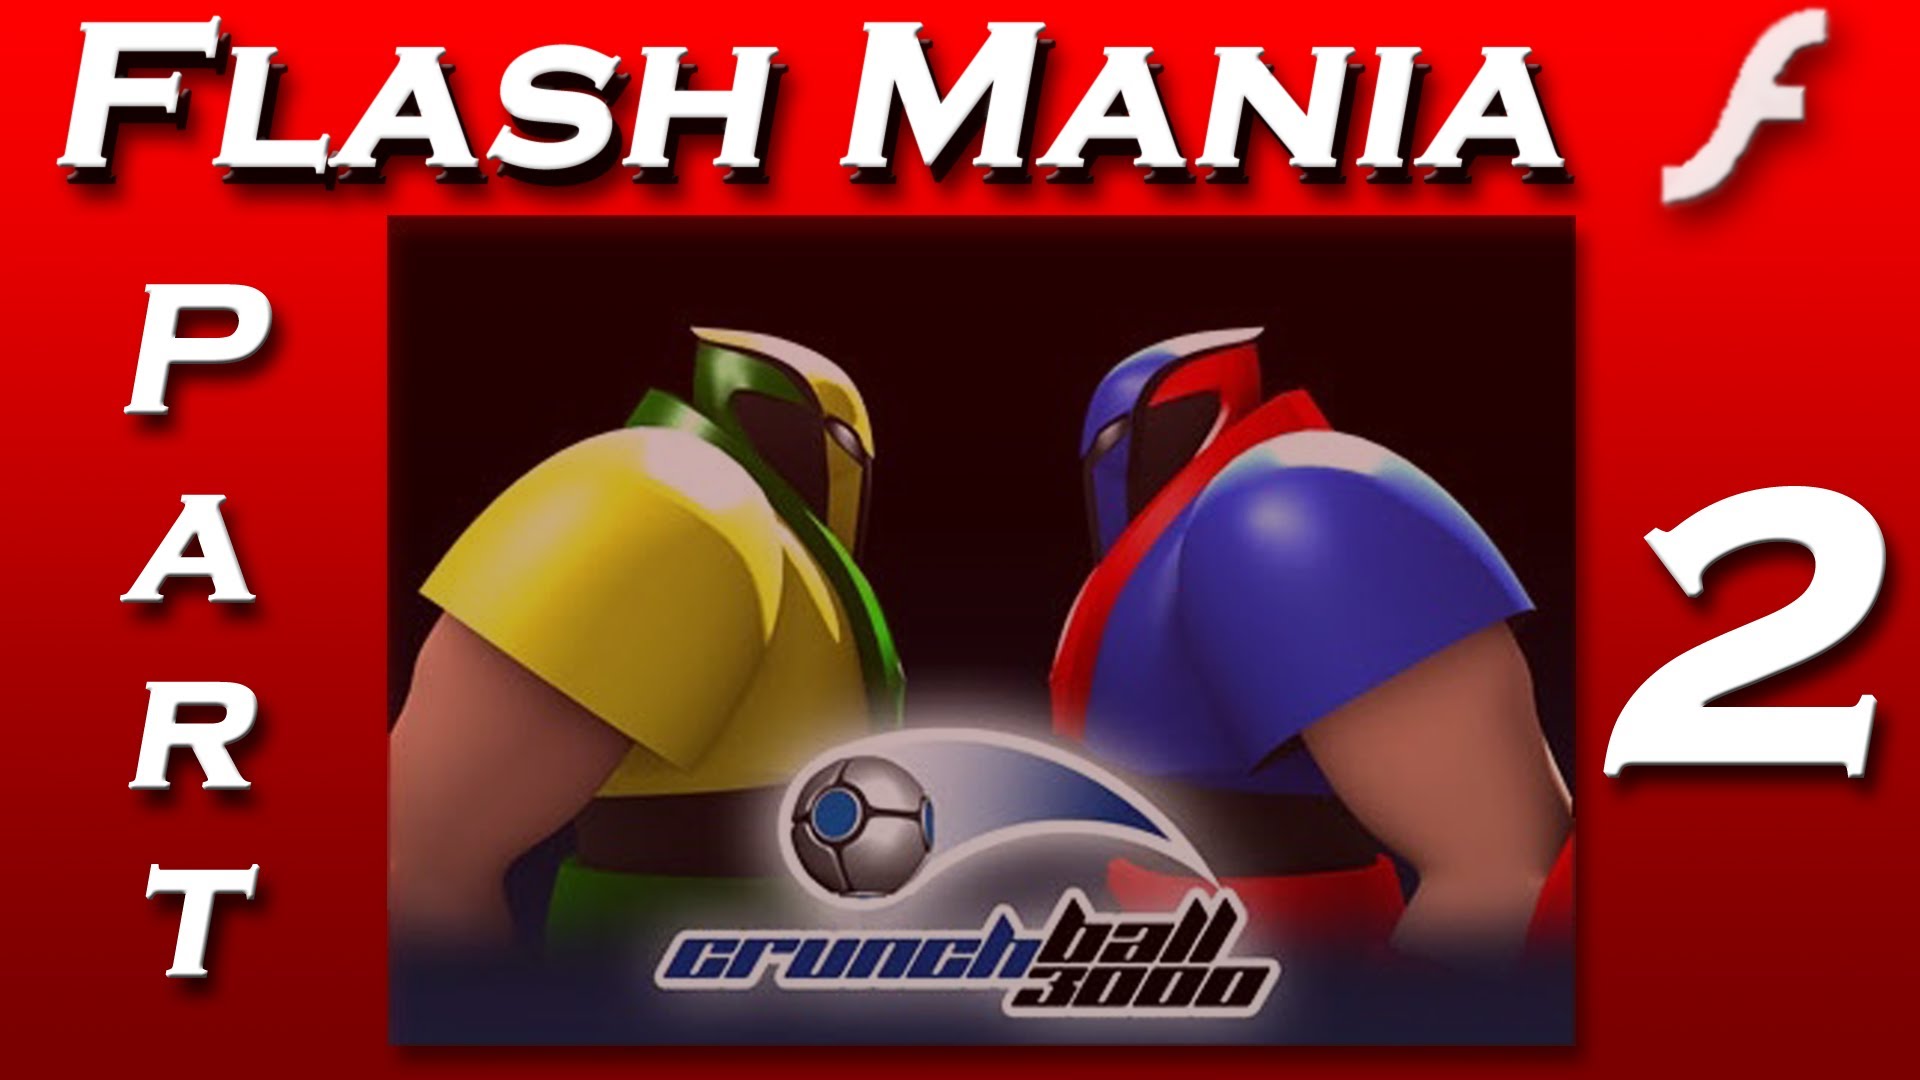 Play Online Crunchball 3000 & Have Fun